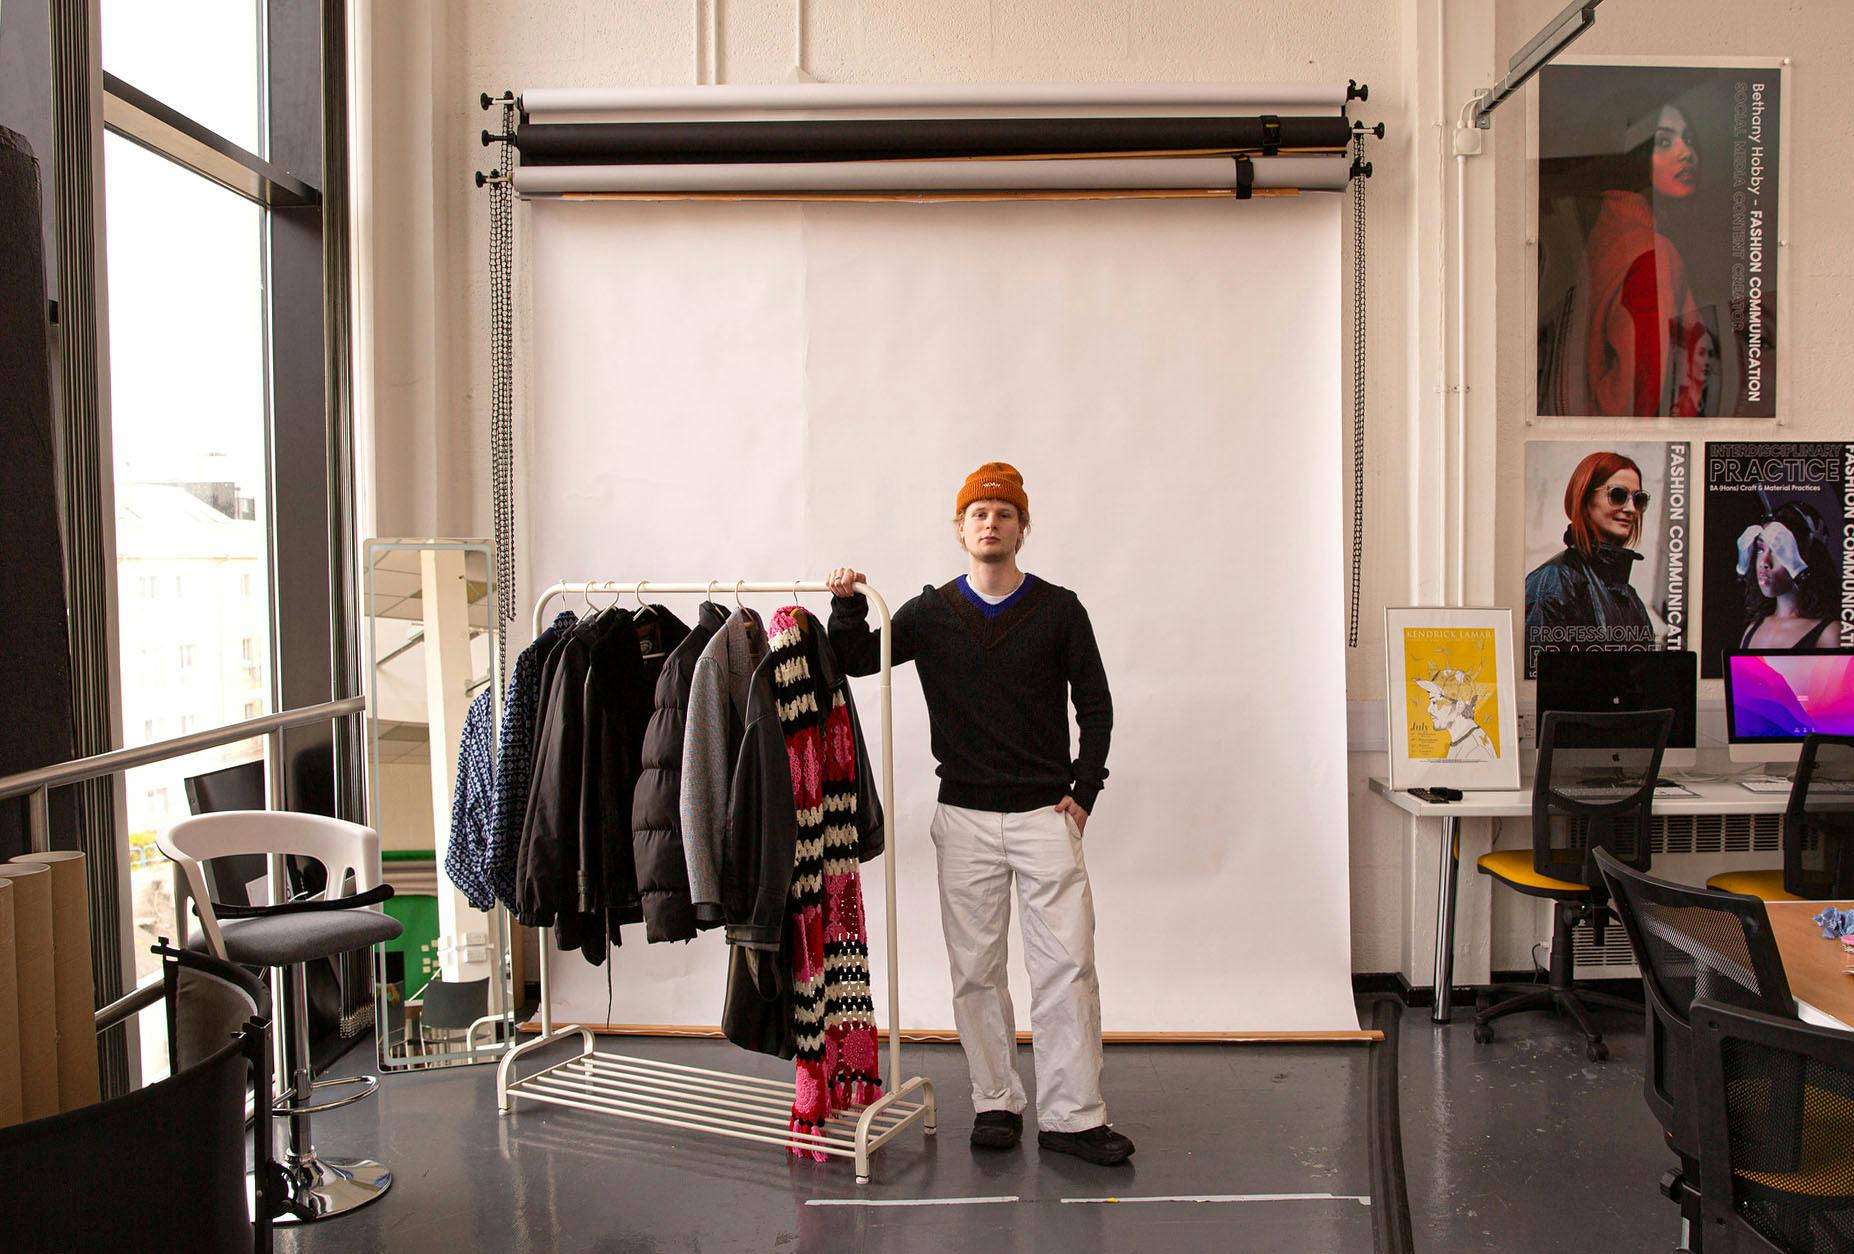 Fashion Communication student Harry Langford stands with a rail of clothes in the studio in front of a white colorama